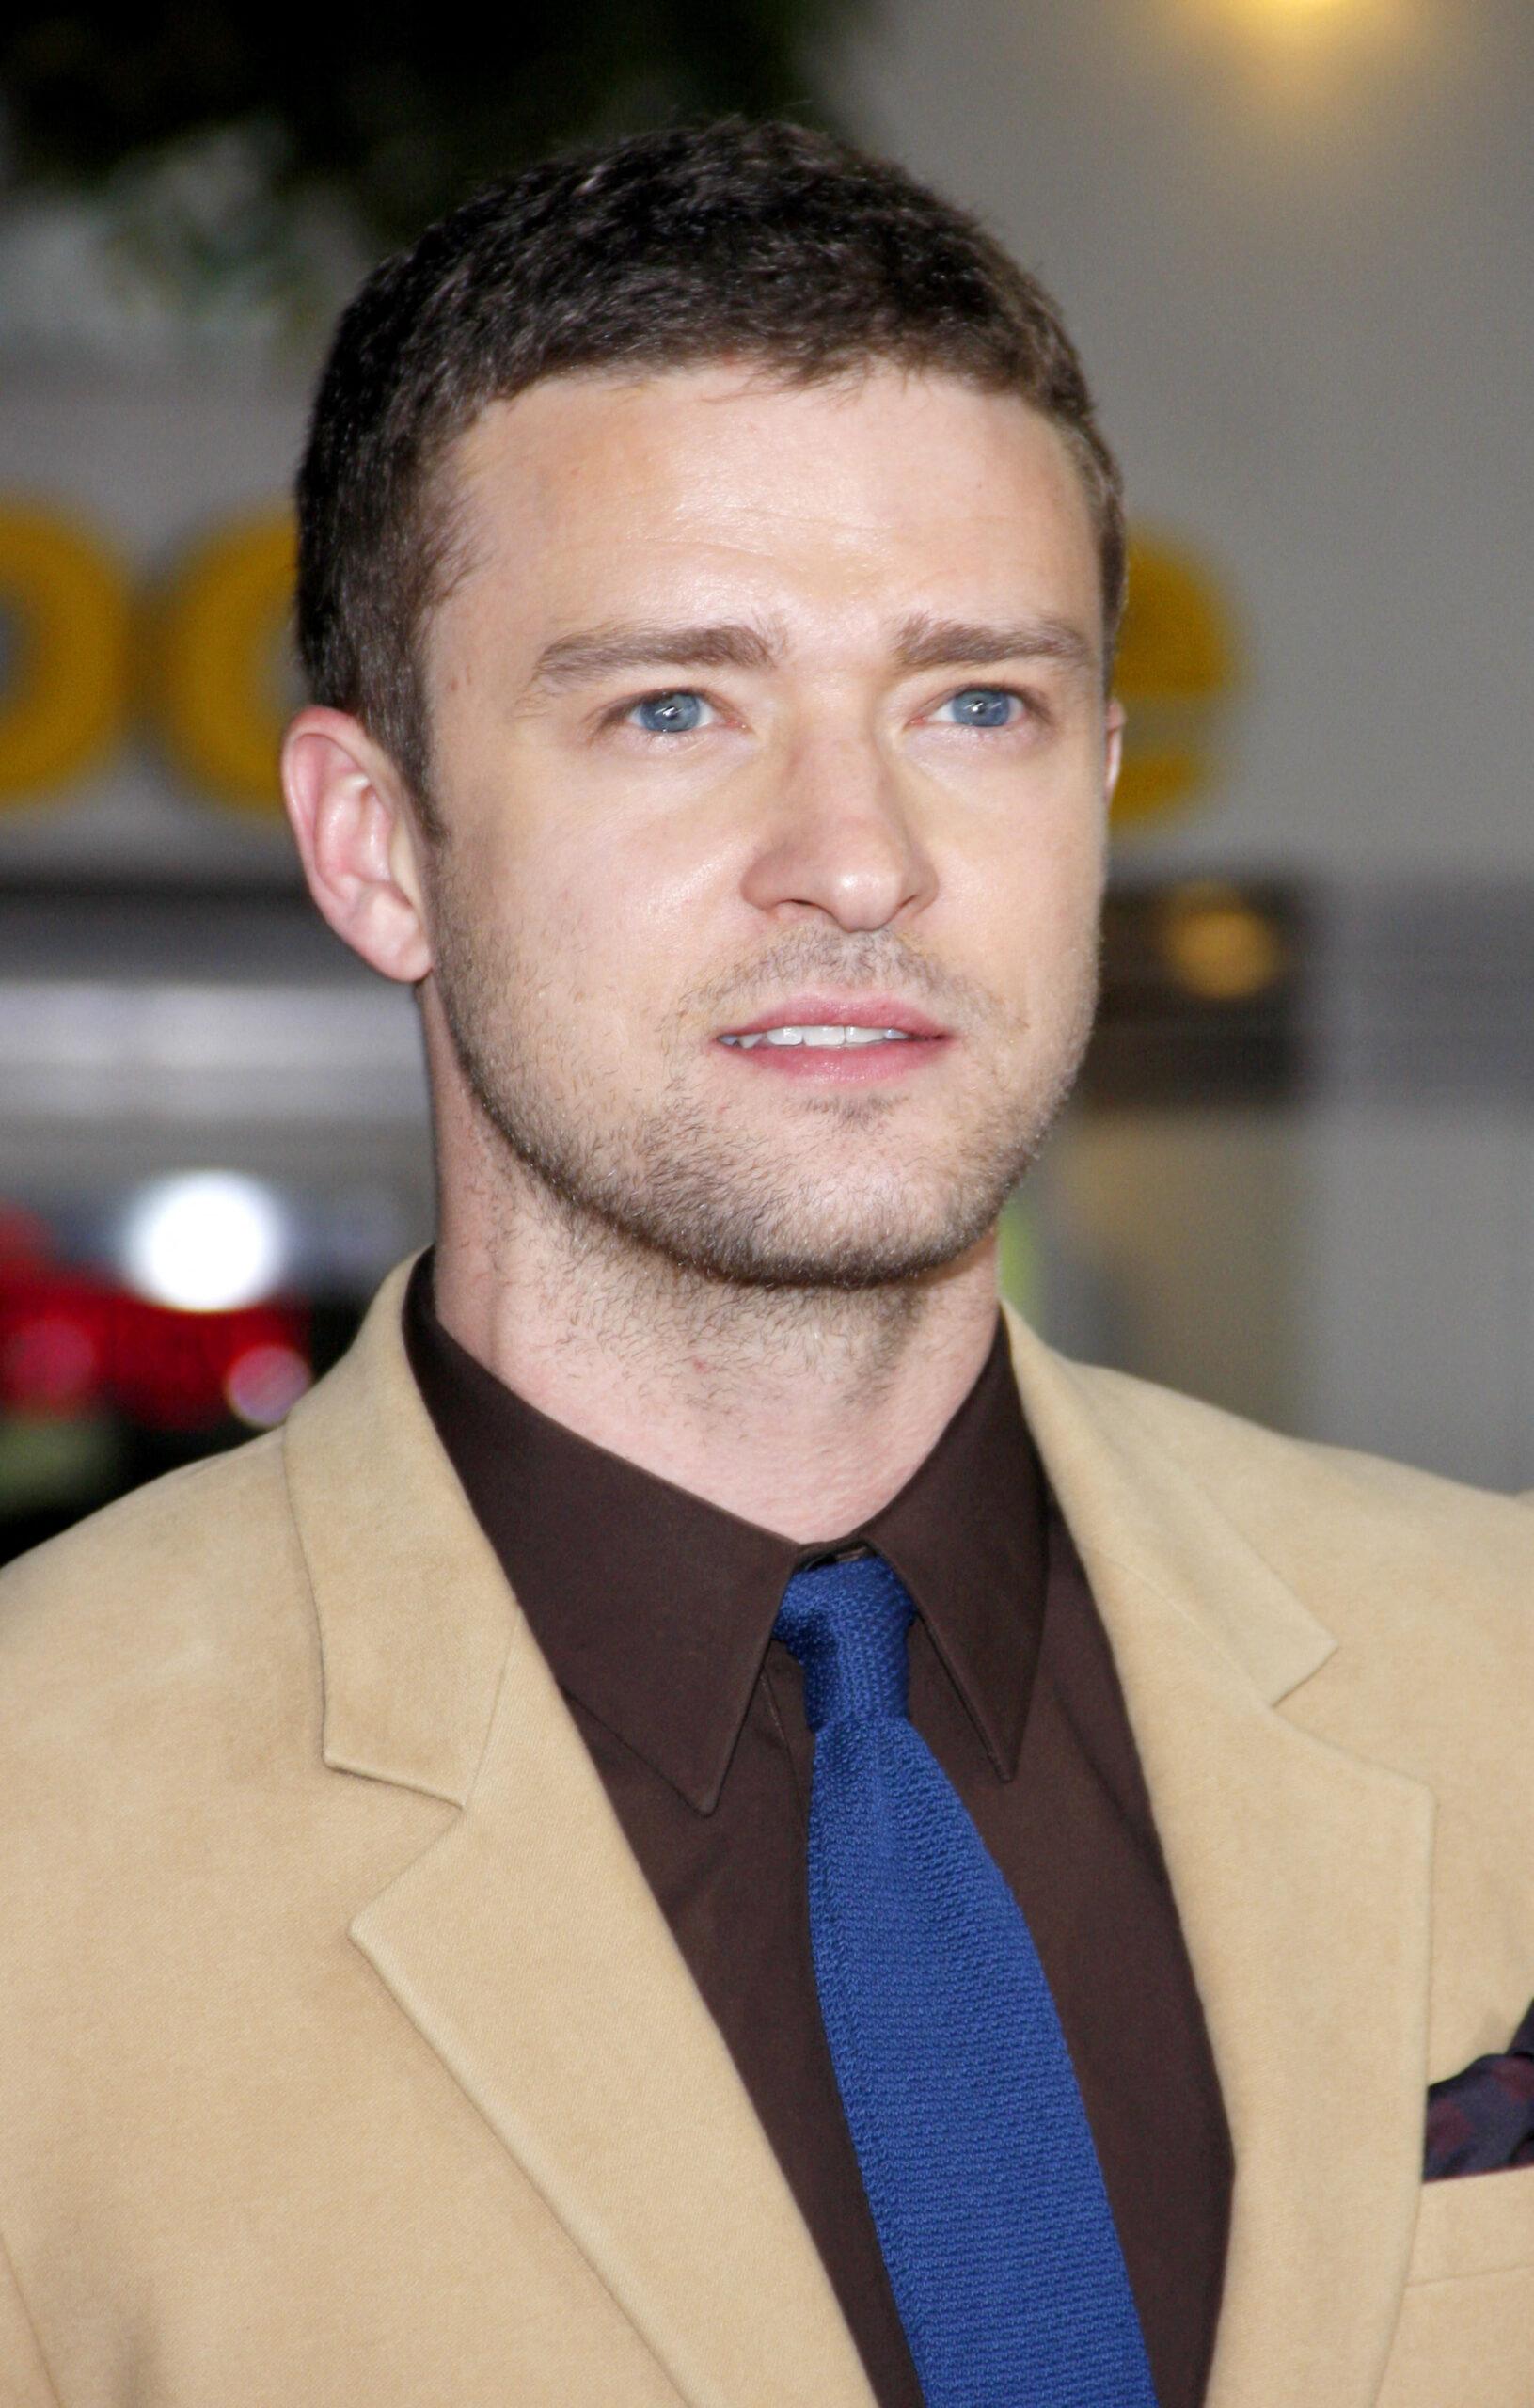 Justin Timberlake at the Los Angeles premiere of 'In Time' - Arrivals